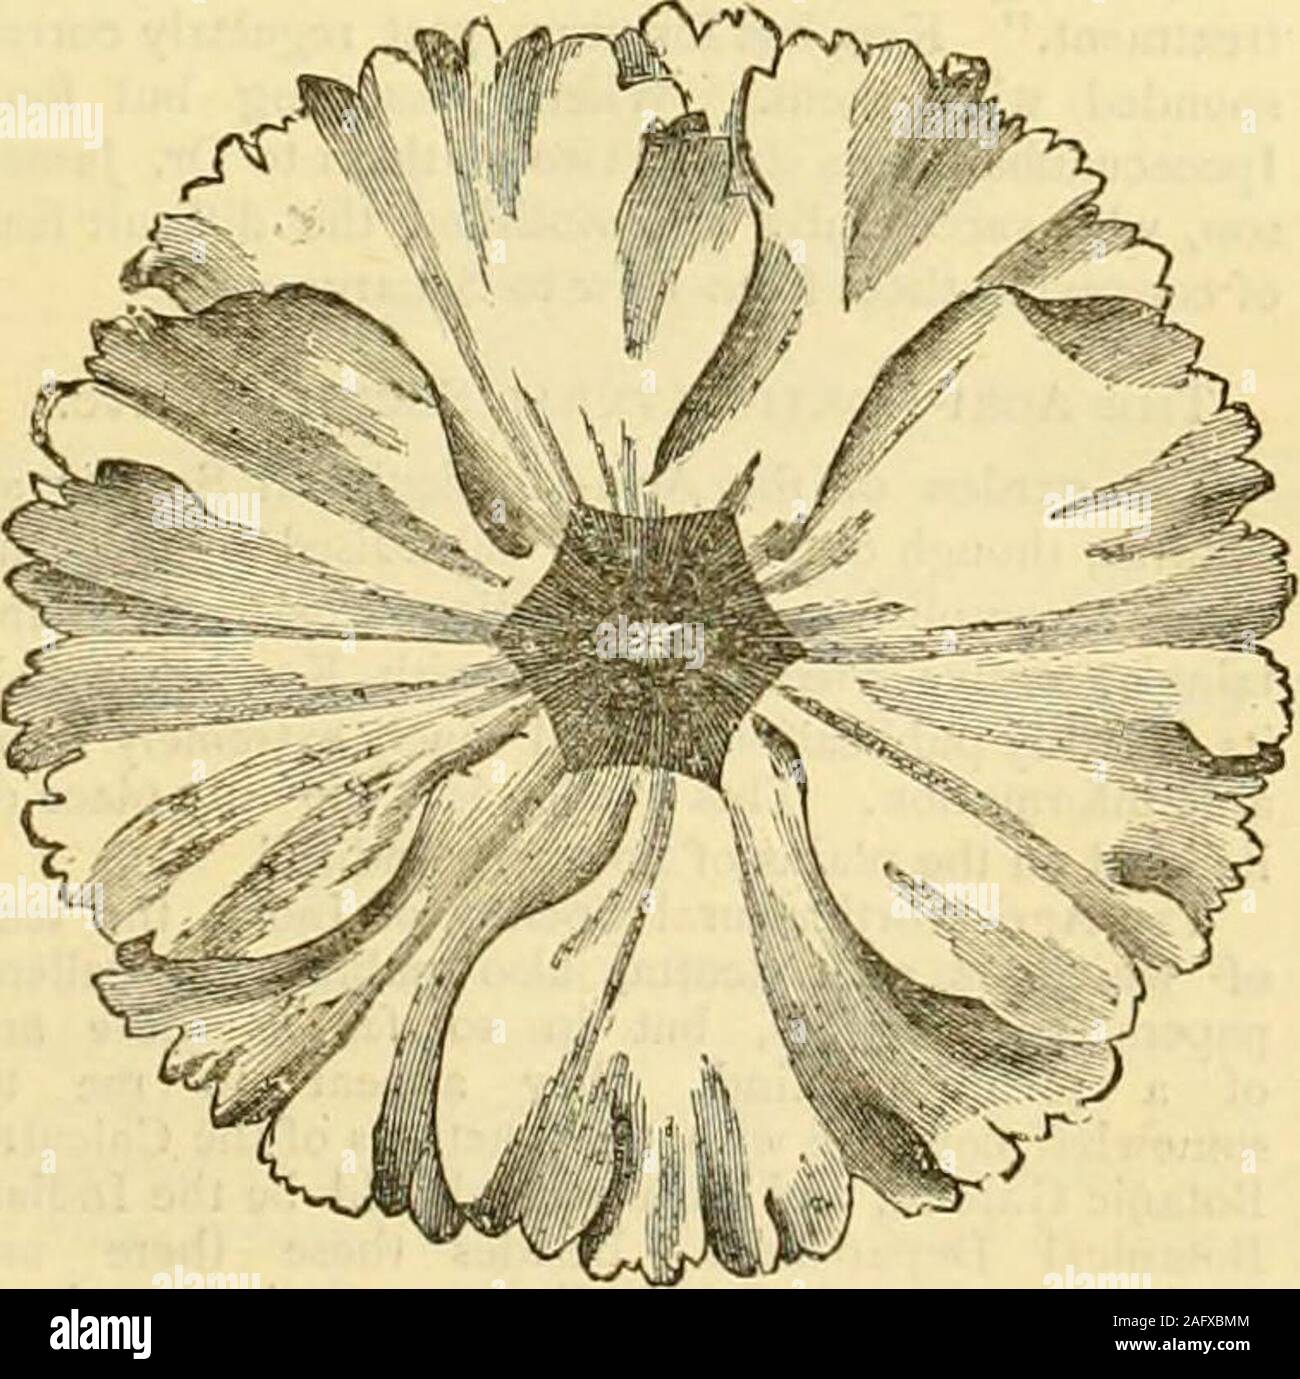 . The Gardeners' chronicle : a weekly illustrated journal of horticulture and allied subjects. CINERARIA, Weatherills Extra Choice Strain, 51., 3r. 6d., 7S. 6d., and i 6 CYCLAMEN PERSICUM, Brilliant (New) .. 31. and 3 6 CYCLAMEN PERSICUM GIGANTEUM, 51., 31. 6d. & i 6 CYCLAMEN PERSICUM GIGANTEUM RUBRUM (New) ji. and 3 6 CYCLAMEN PERSICUM, Williams Superb Strain, SS.f ;is, 6d.f 2S. 6d., 3Lnd 1 6 PANSY, English Show 2i. 6(!. and i o PANSY, Belgian or Fancy 2s. 6d. and i o. PRIMULA SINENSIS FIMBRLATA COCCINEA (New) 5J., 3i. 6a., and 2 6 PRIMULA SINENSIS HMBRIATA, WilliamsSuperb Strain, Red, White, Stock Photo